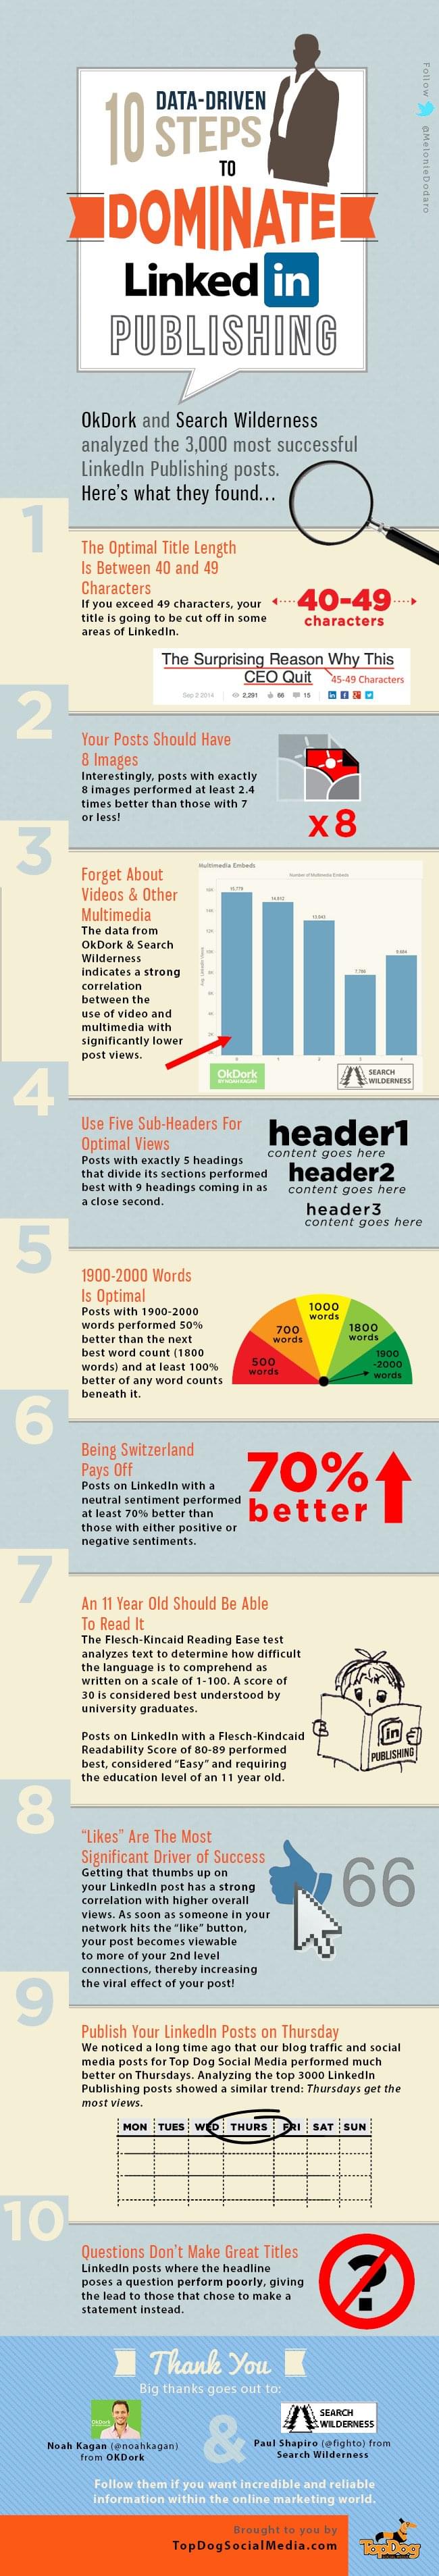 10 Steps to Dominate LinkedIn Publishing (Infographic) - See more at: http://www.socialtalent.co/blog/10-steps-to-dominate-linkedin-publishing-infographic#sthash.p2X0ucUl.dpuf